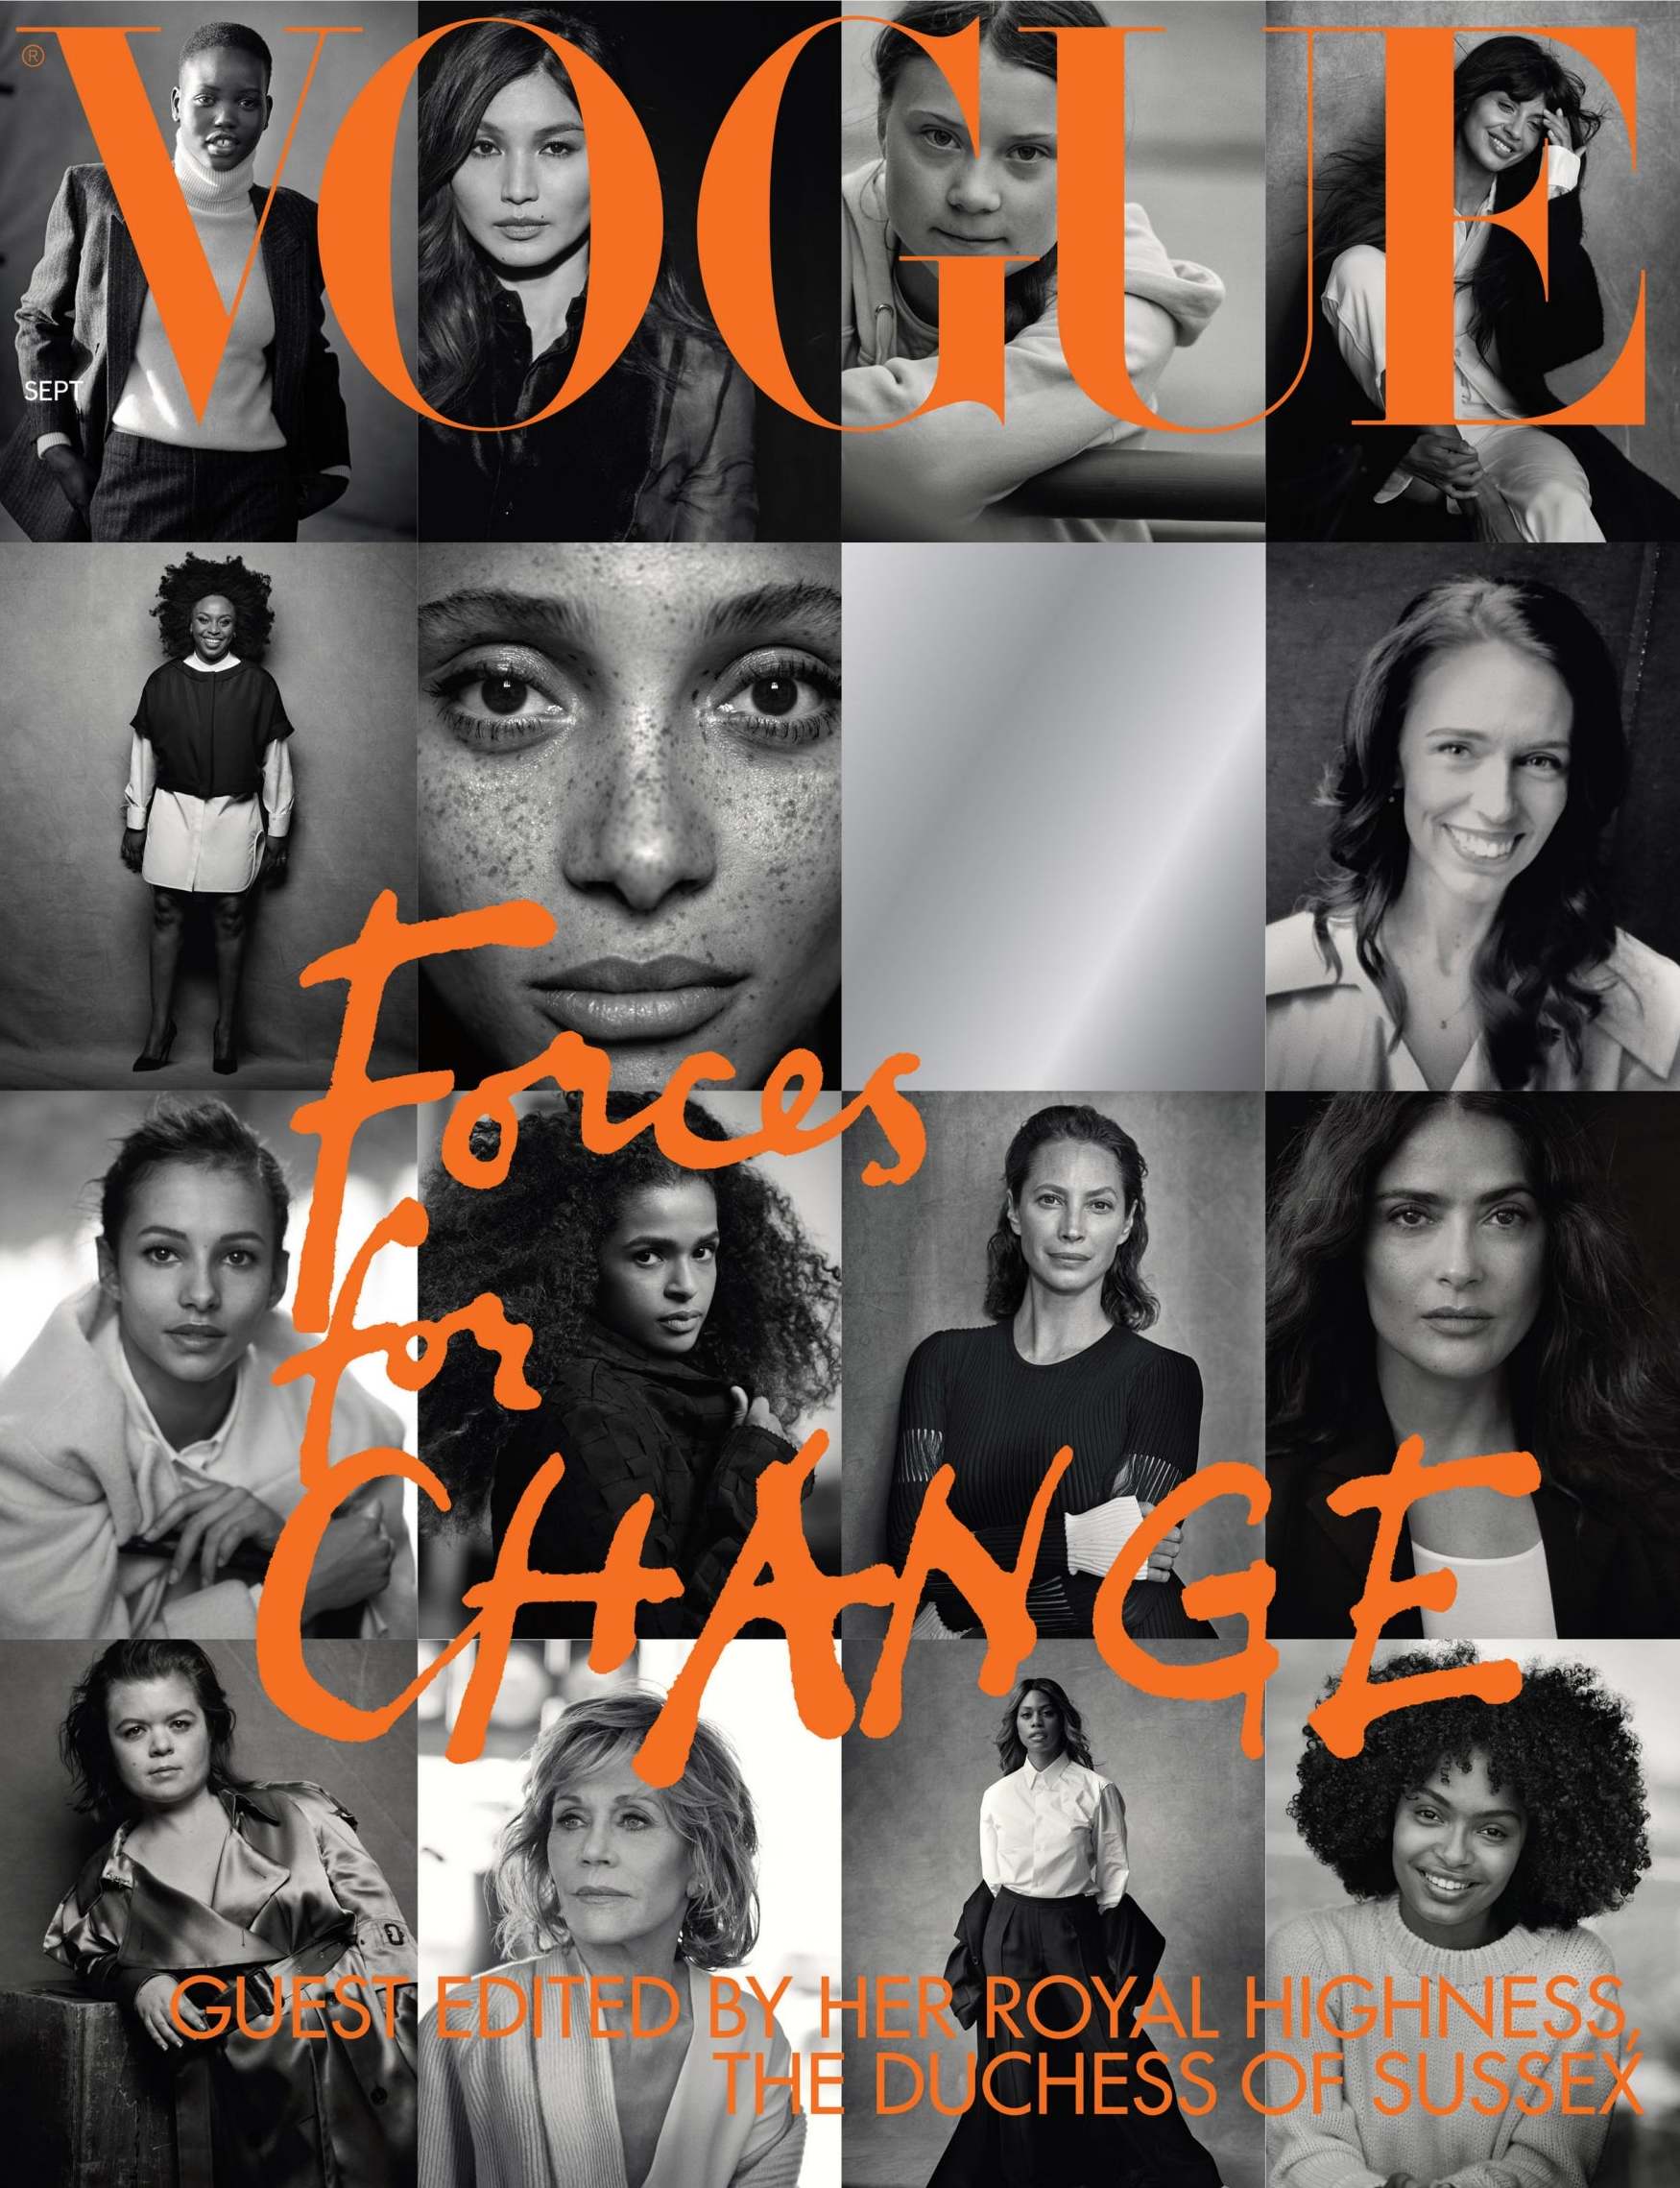 British Vogue’s September issue, guest edited by the Duchess of Sussex